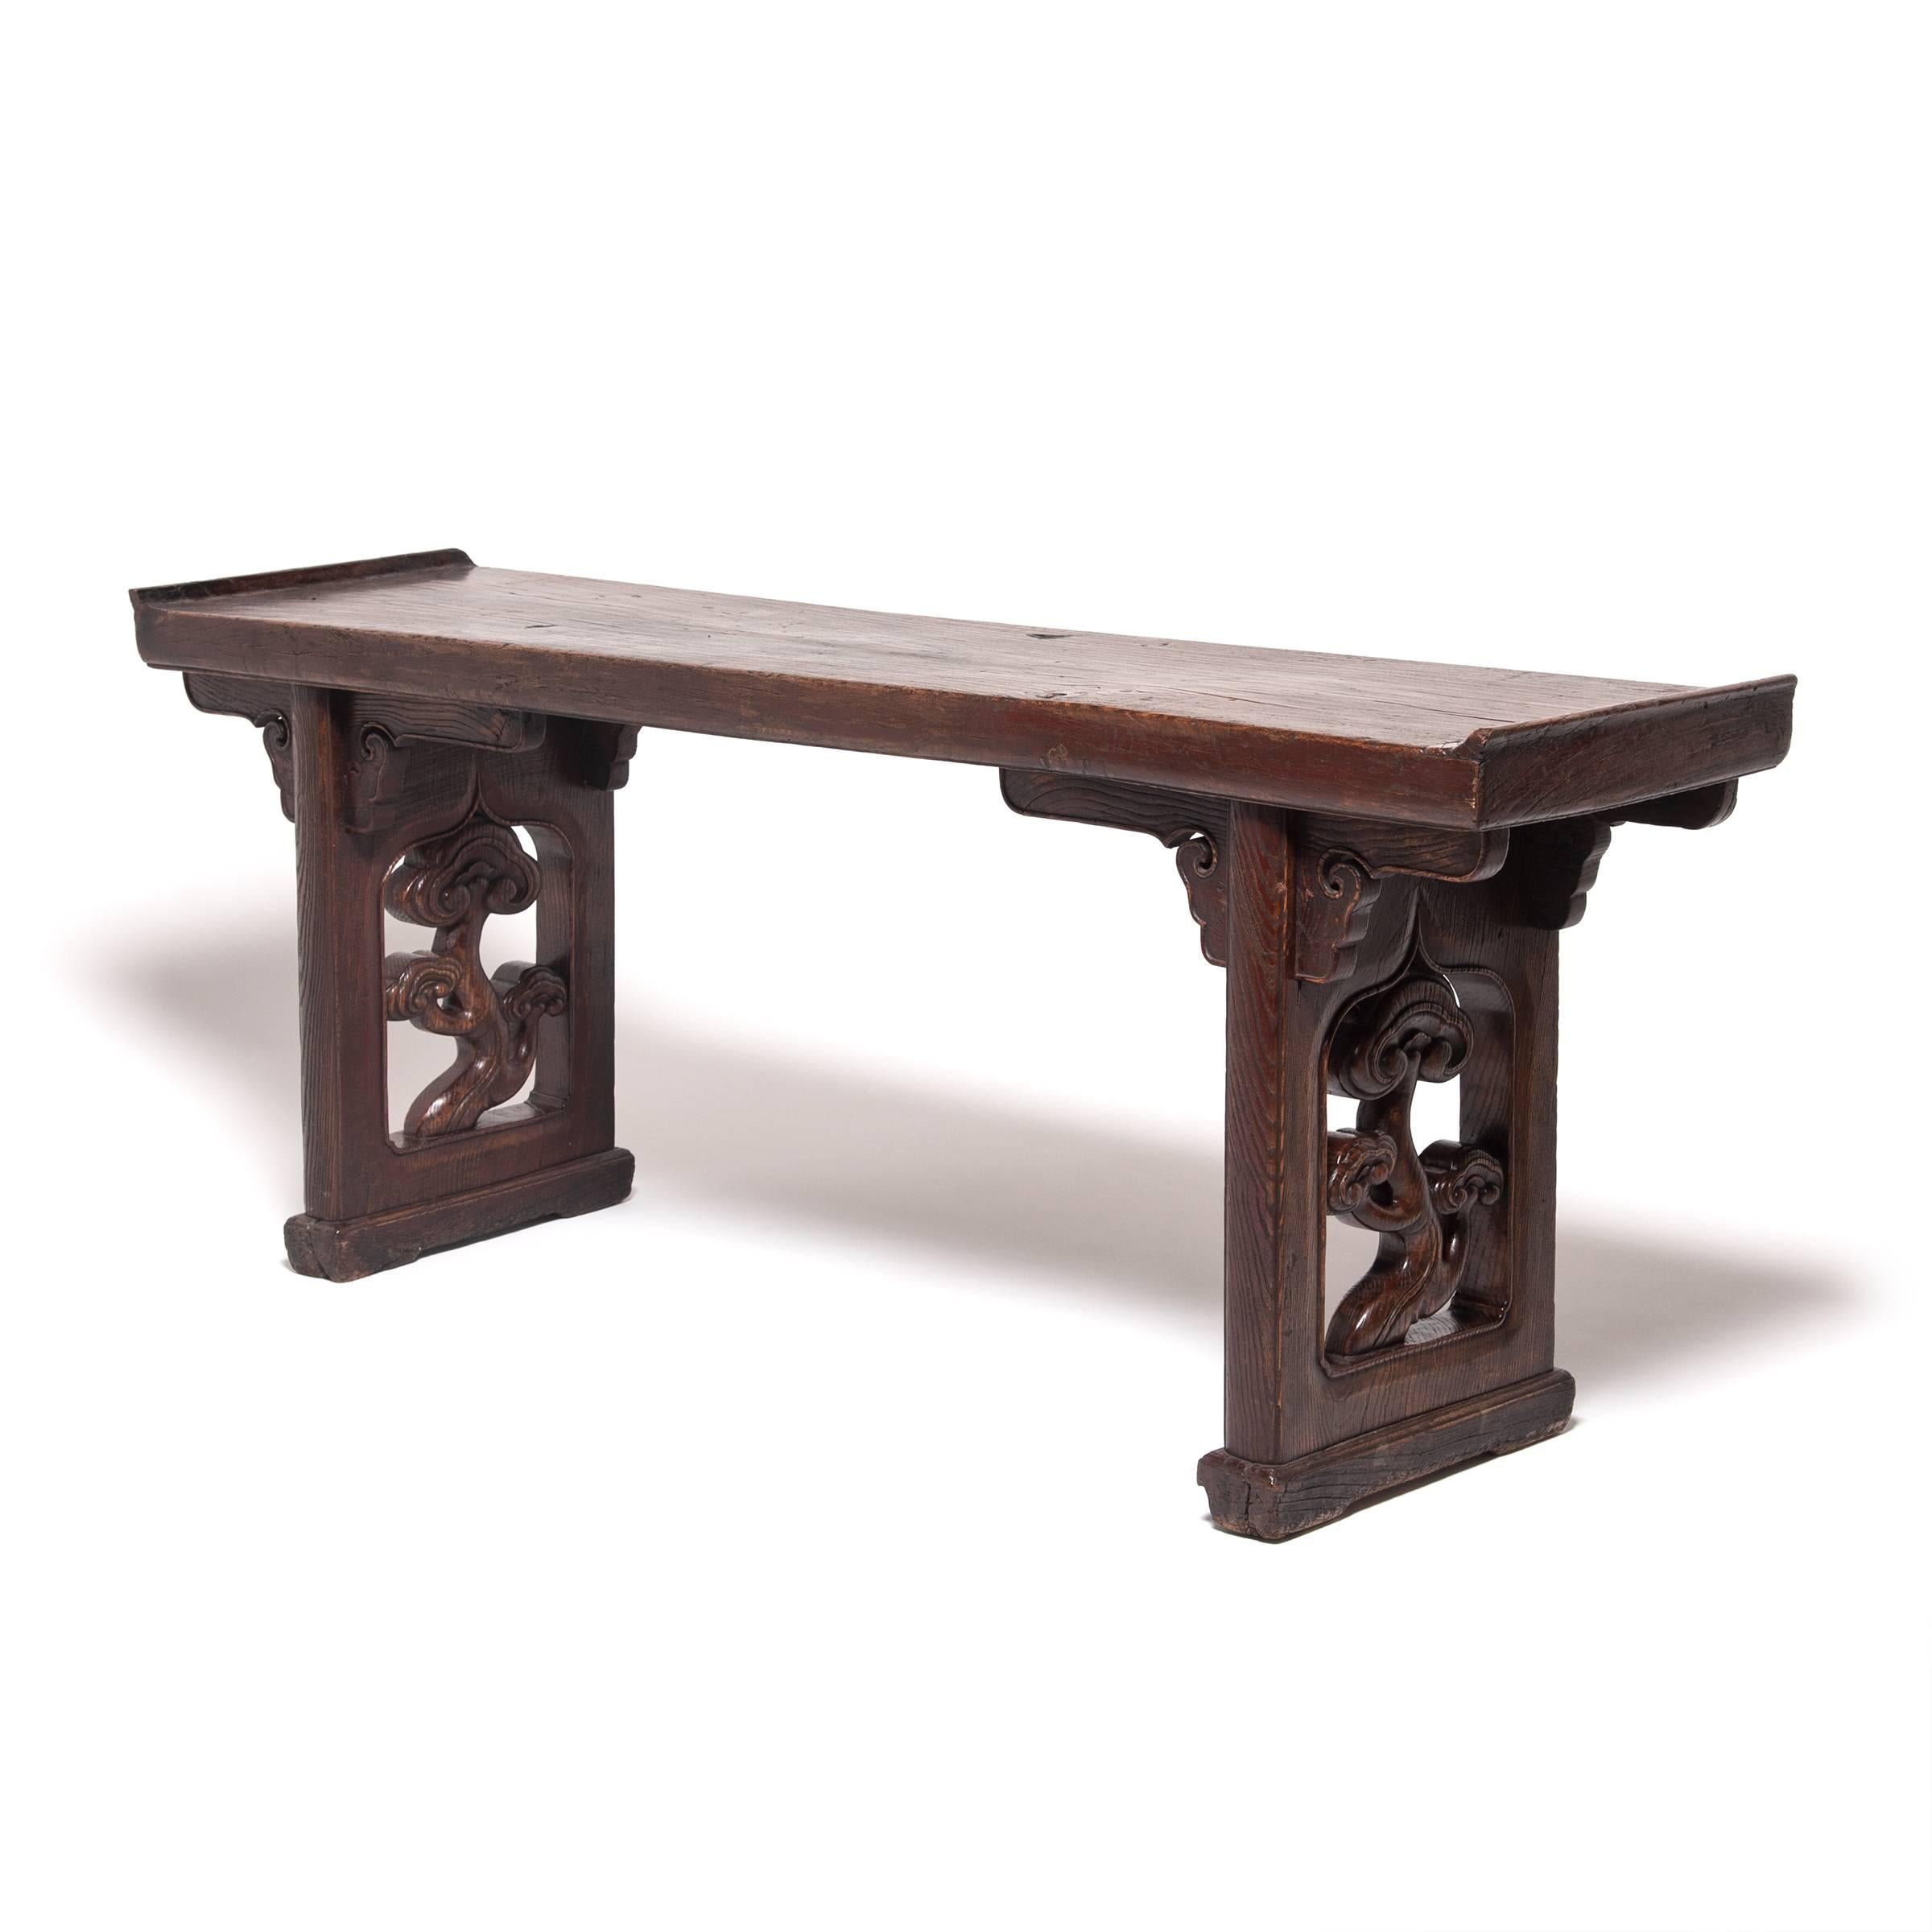 This monumental early 19th century flanked top altar table from China's Shanxi province is notable for its robust traditional style. The top is carved from a solid plank of elmwood timber and the thick side panels are carved with uniquely smooth and